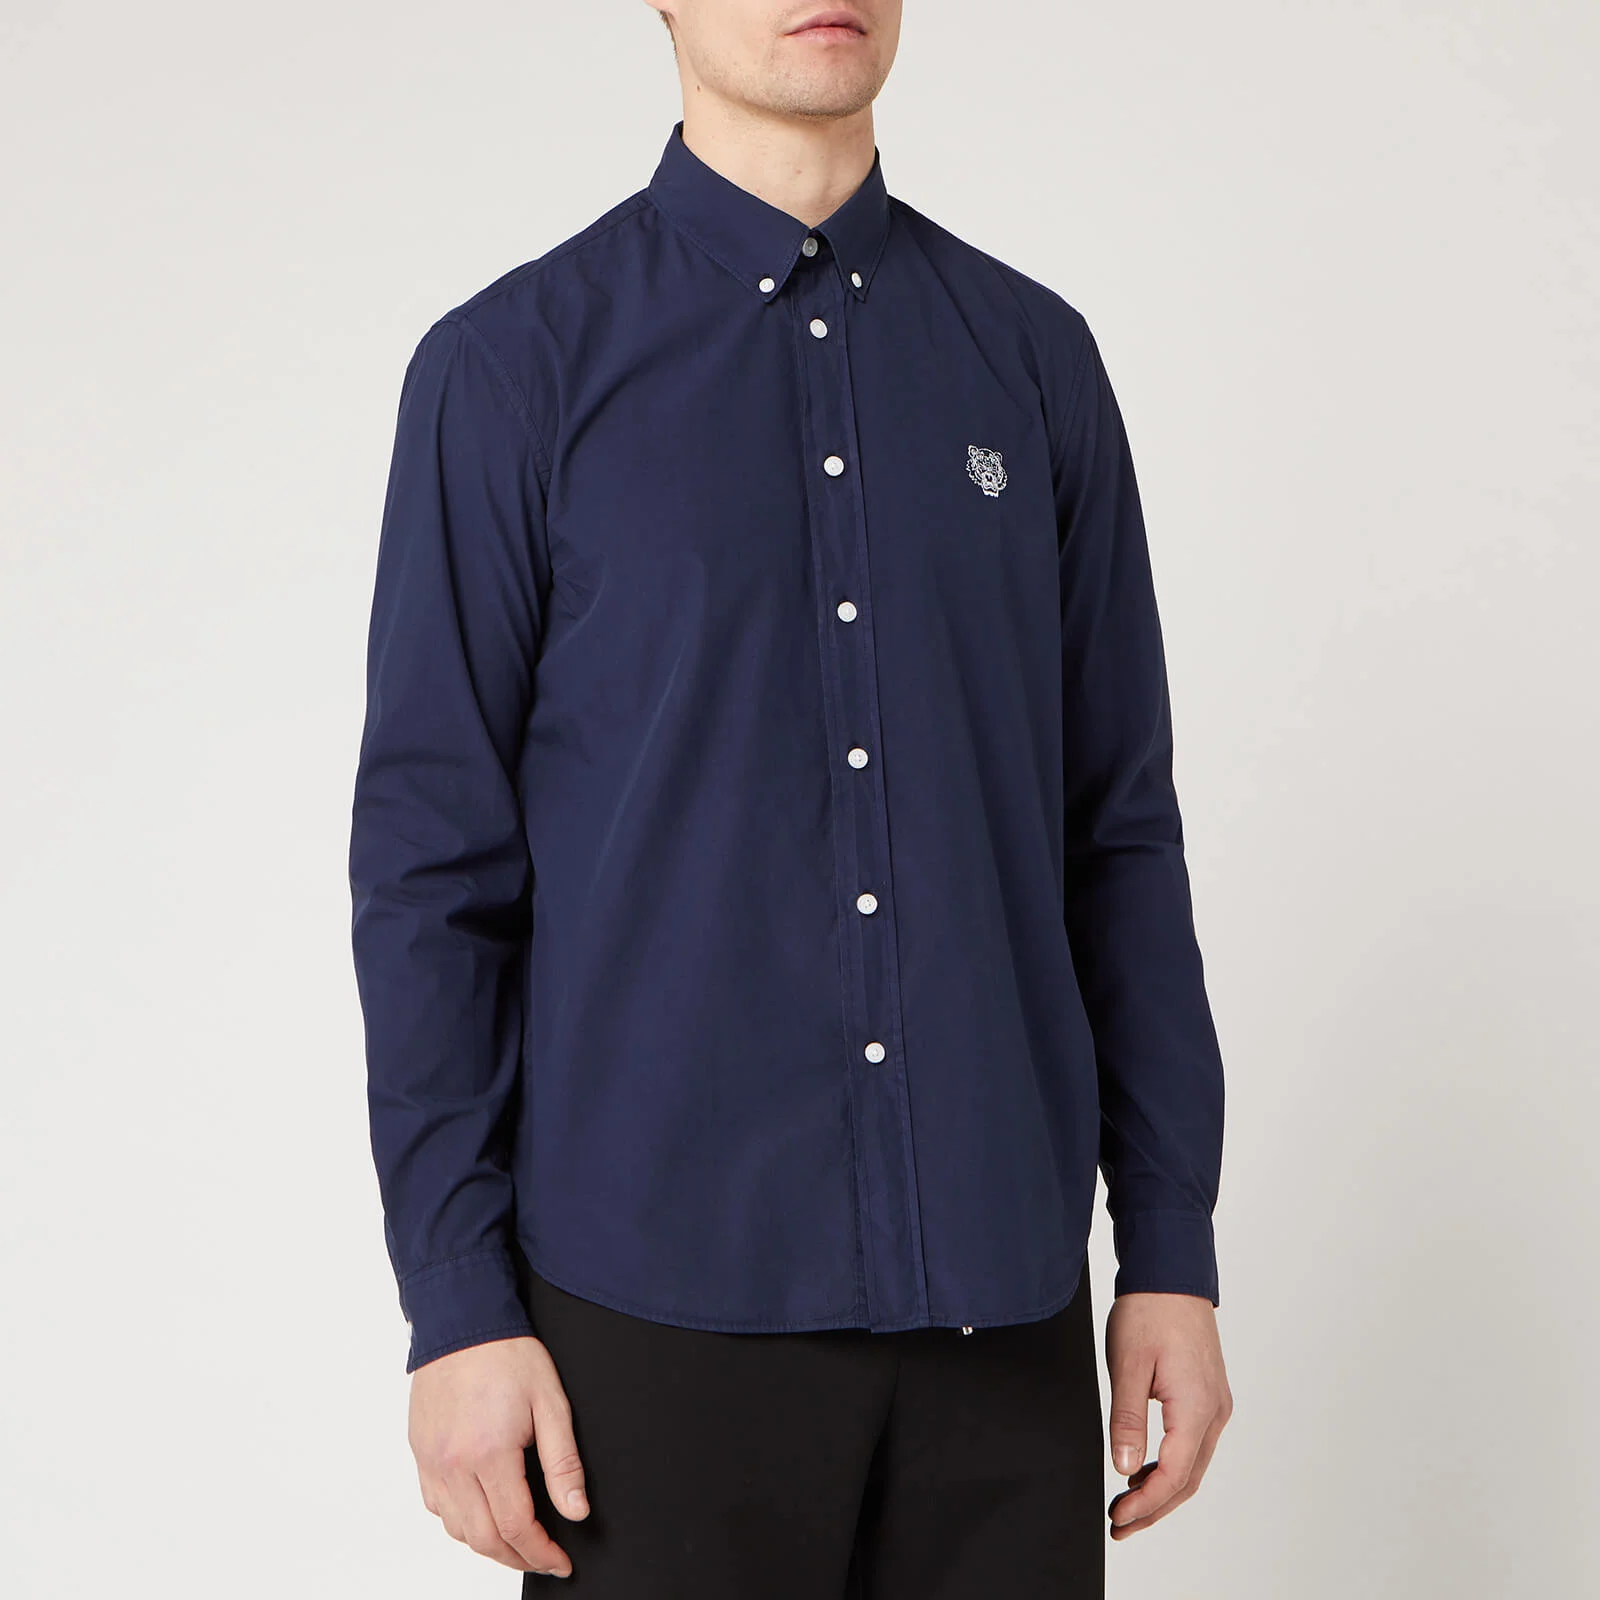 KENZO Men's Tiger Crest Casual Fit Shirt - Midnight Blue Image 1